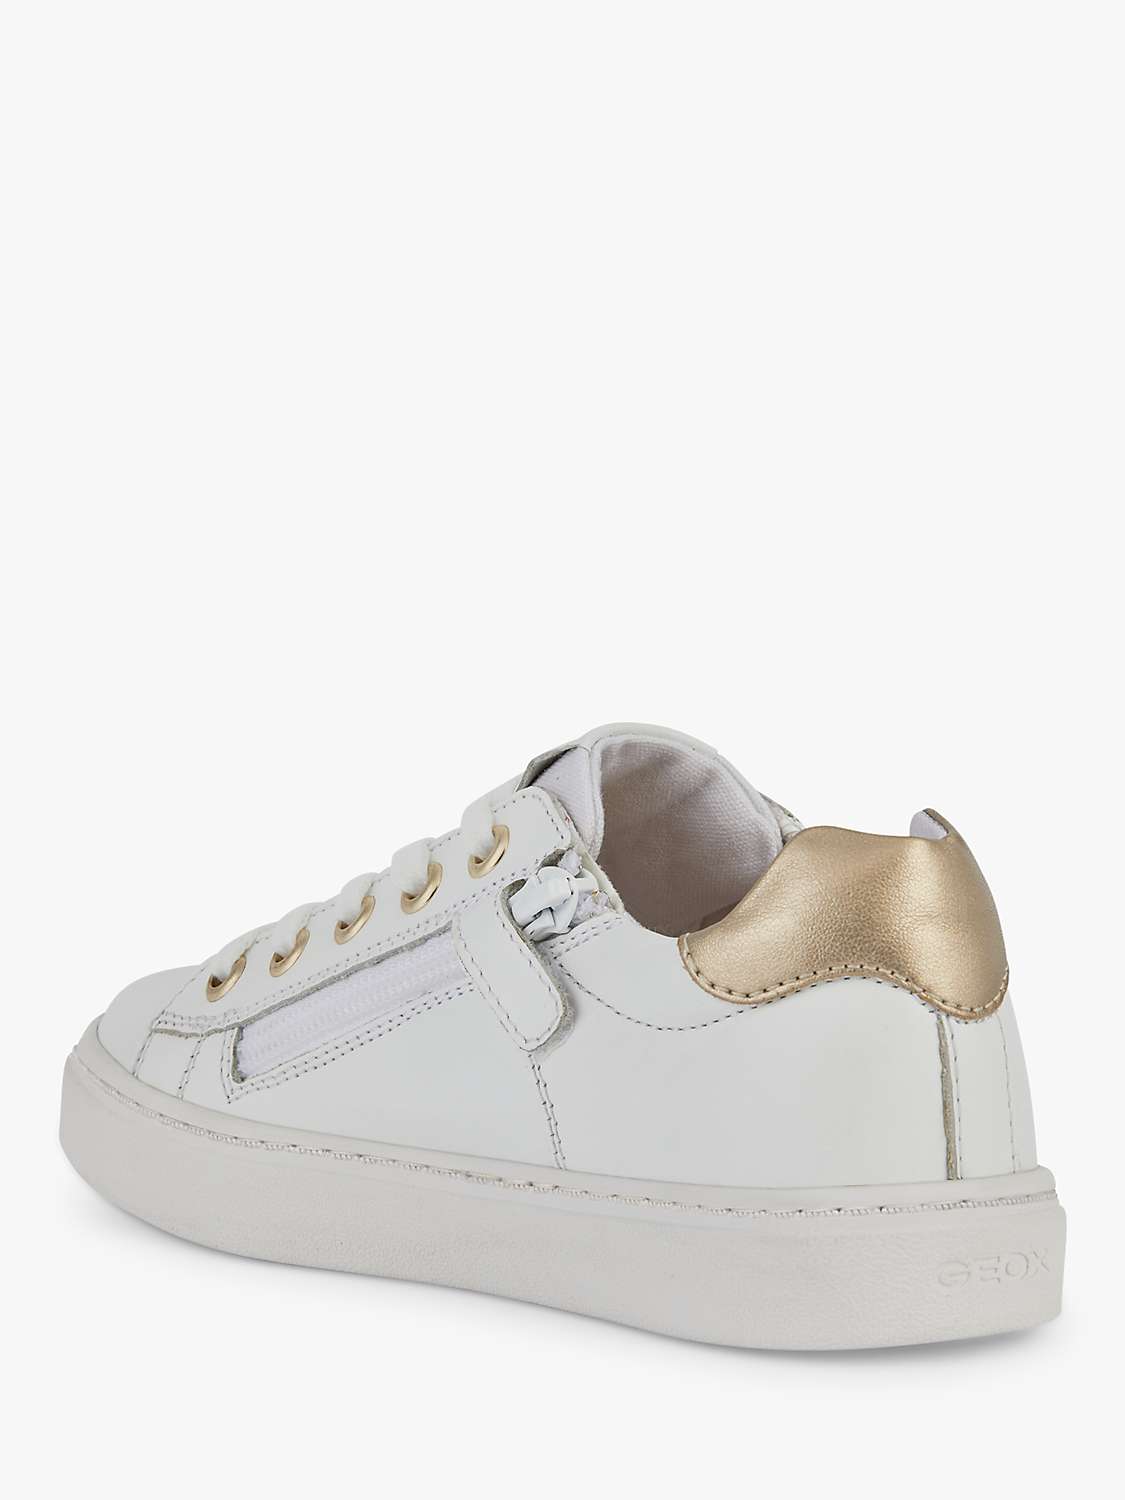 Buy Geox Kids' Nashik Leather Blend Lace Up Trainers, White/Gold Online at johnlewis.com